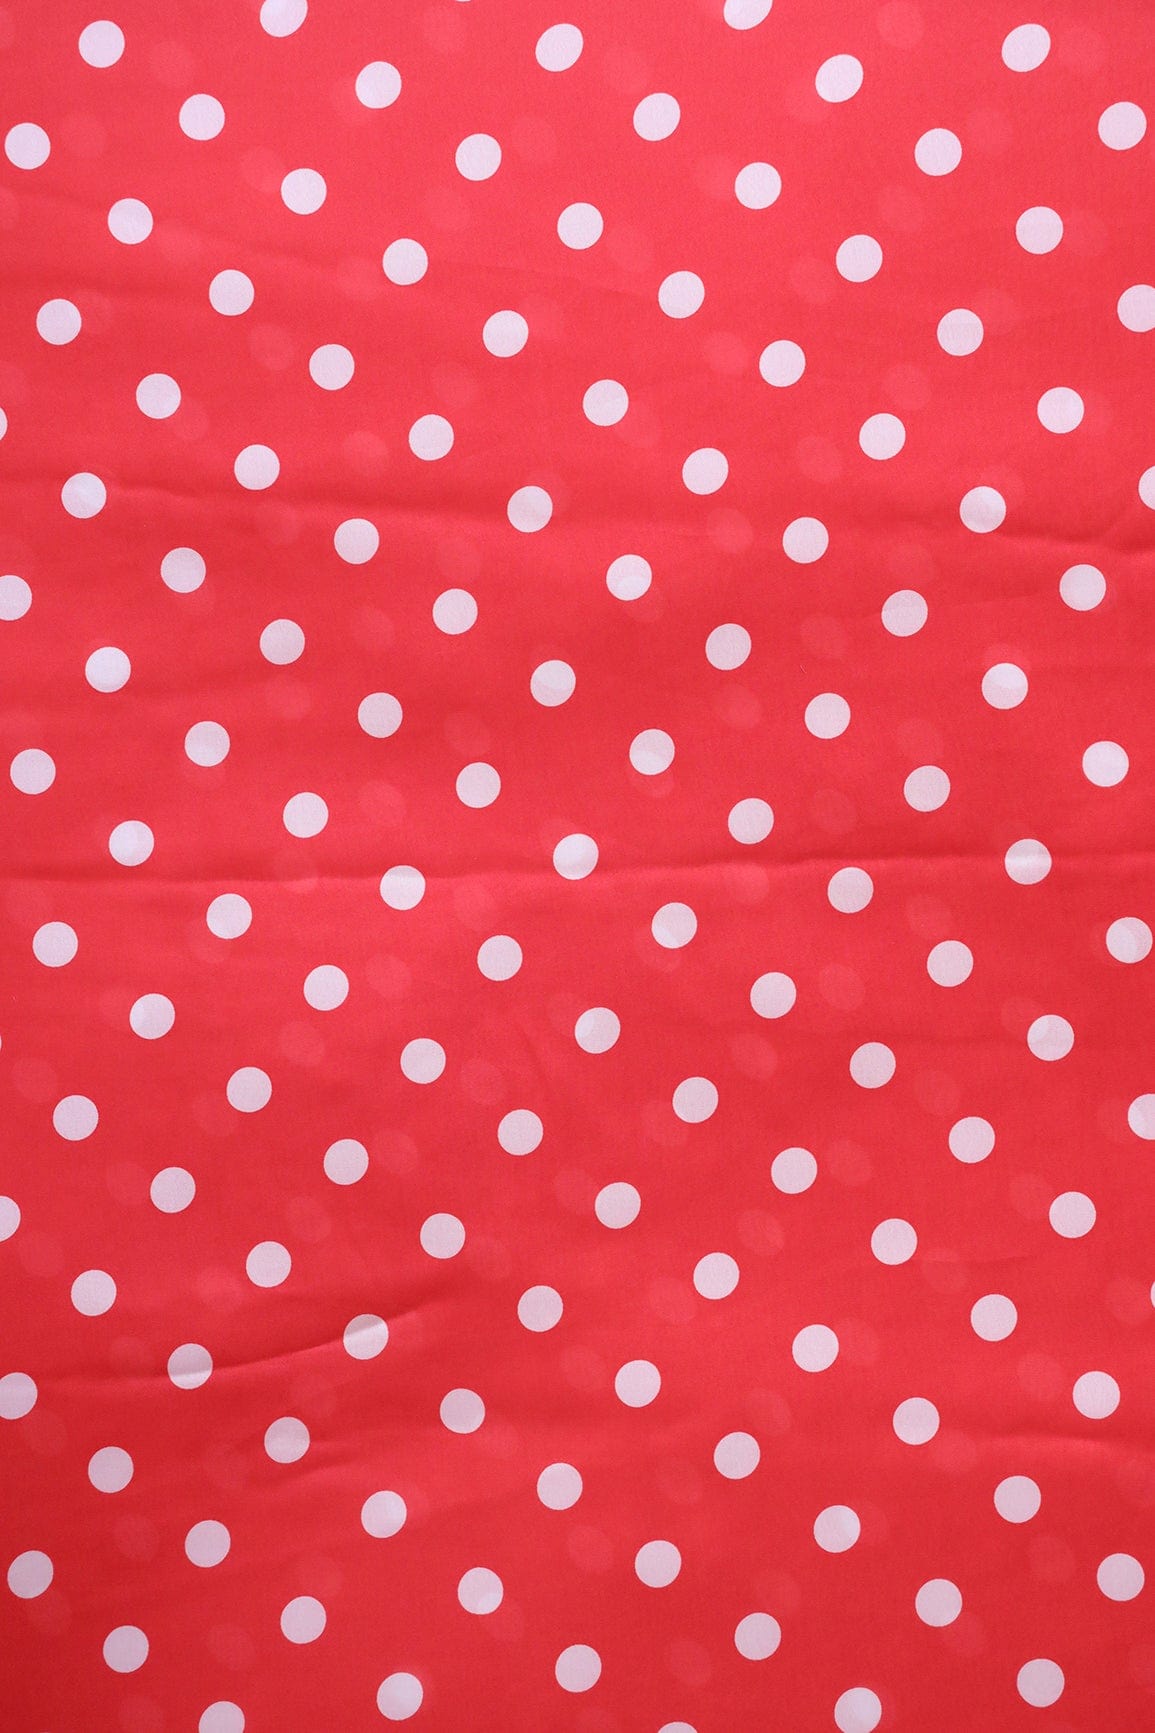 doeraa Prints Red And White Polka Dots Pattern Digital Print On Georgette Satin Fabric